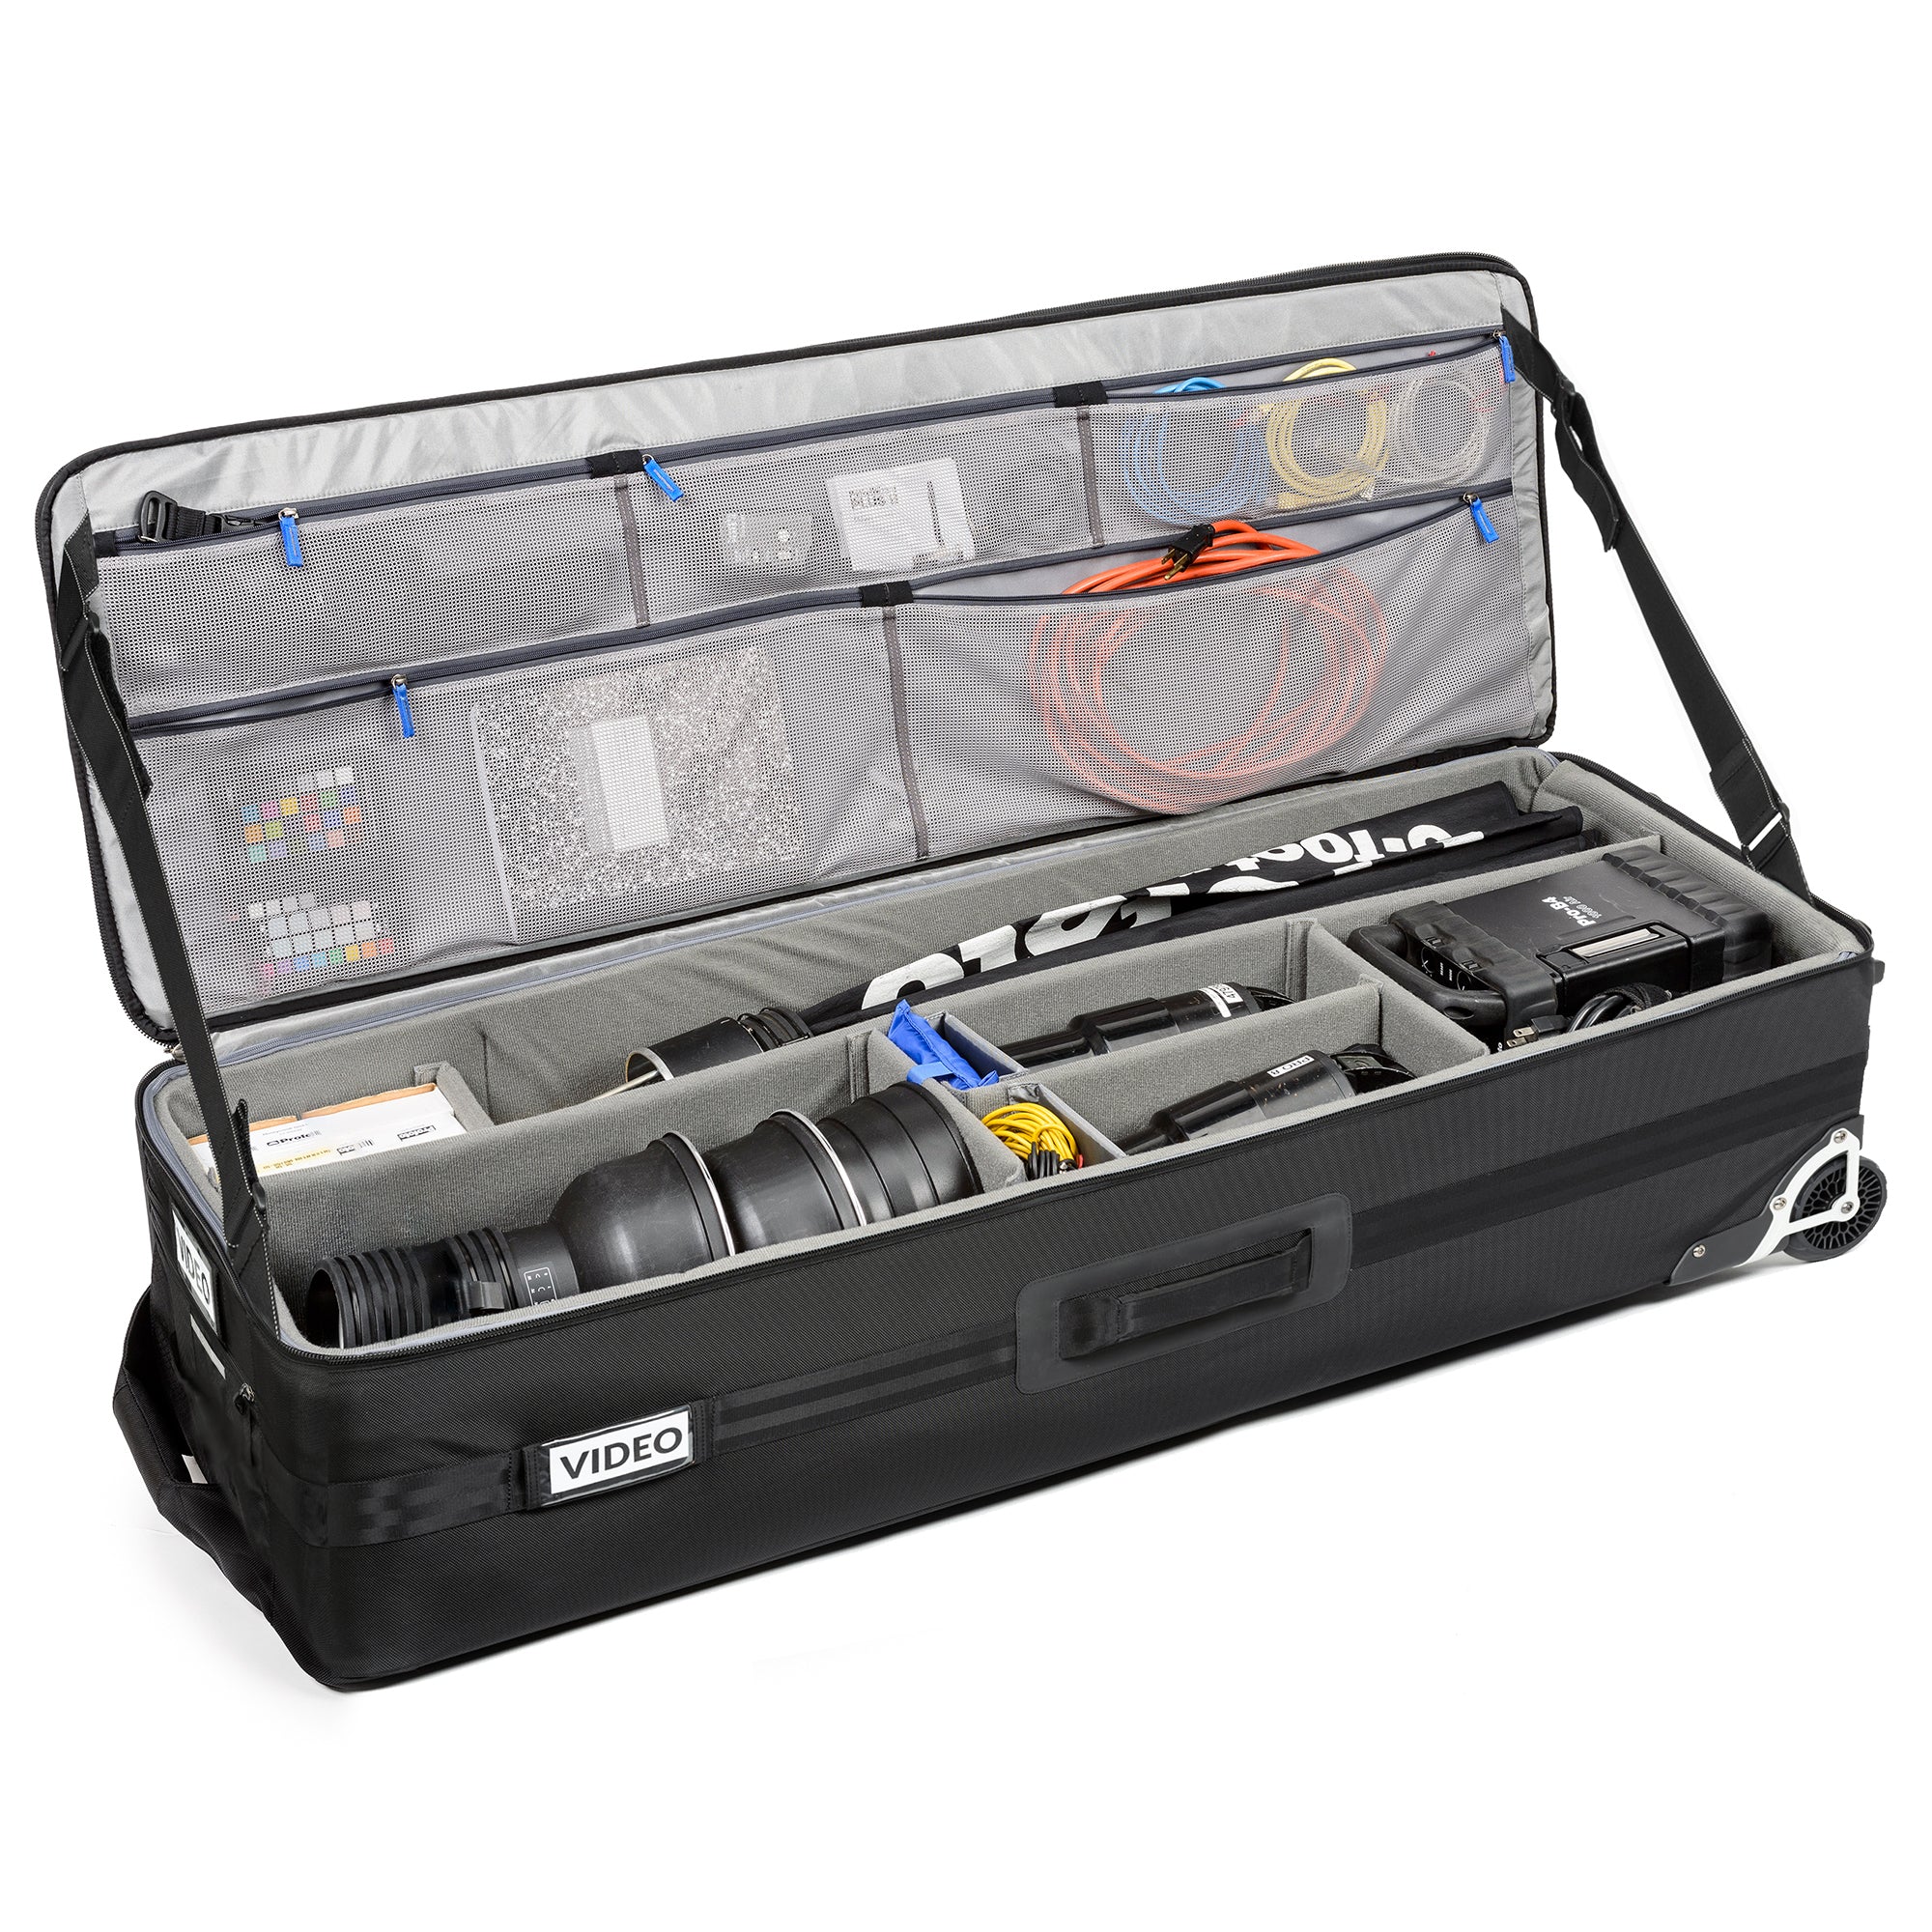 Professional Cable File Bag CFB-03 - Cable & Accessories Organizer